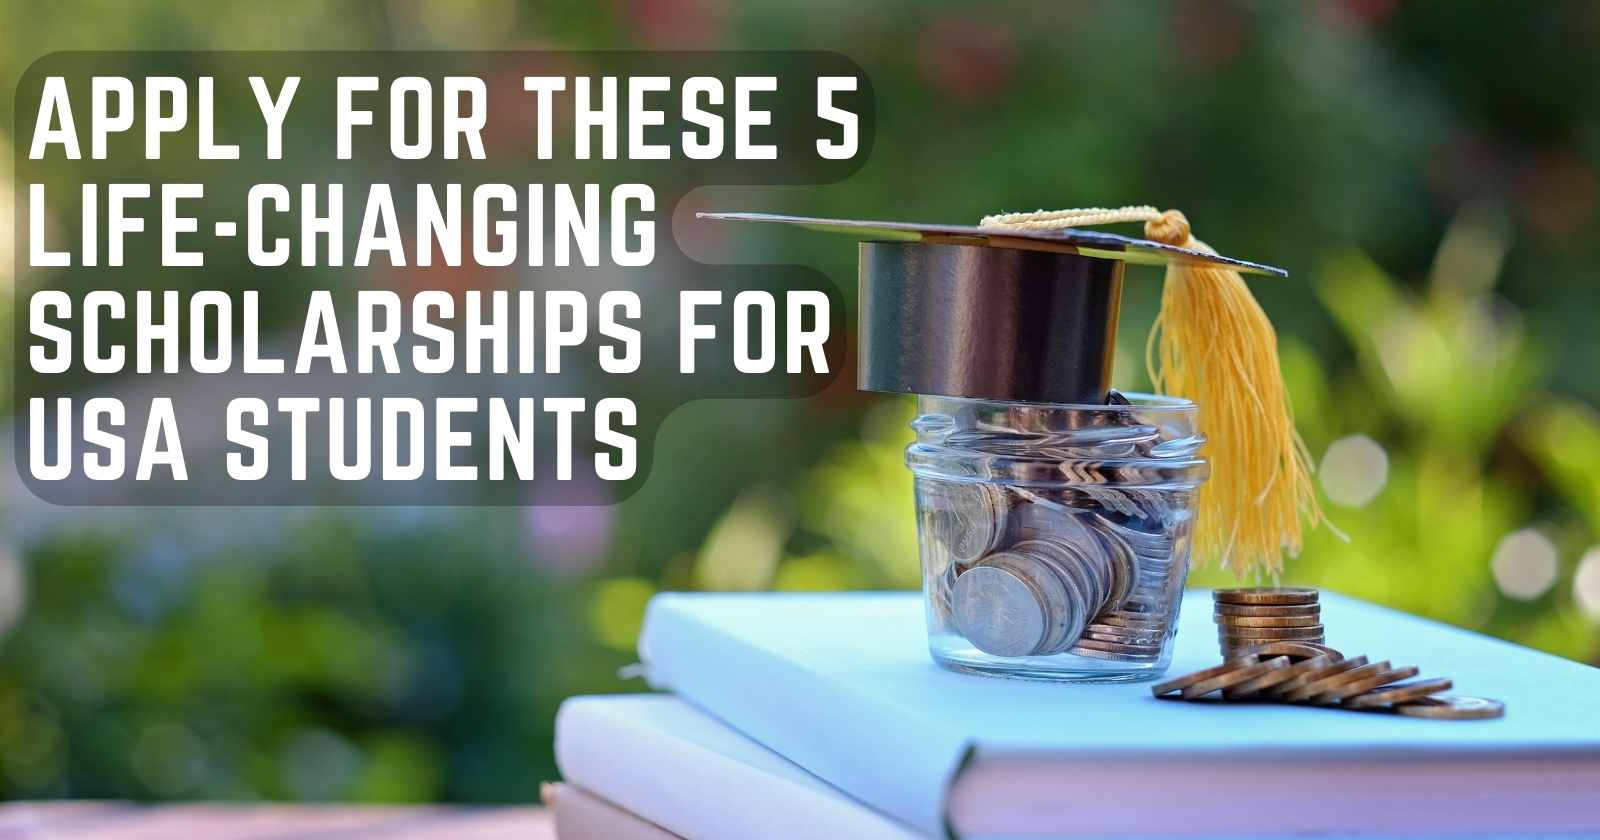 Apply for These 5 Life-Changing Scholarships for USA Students